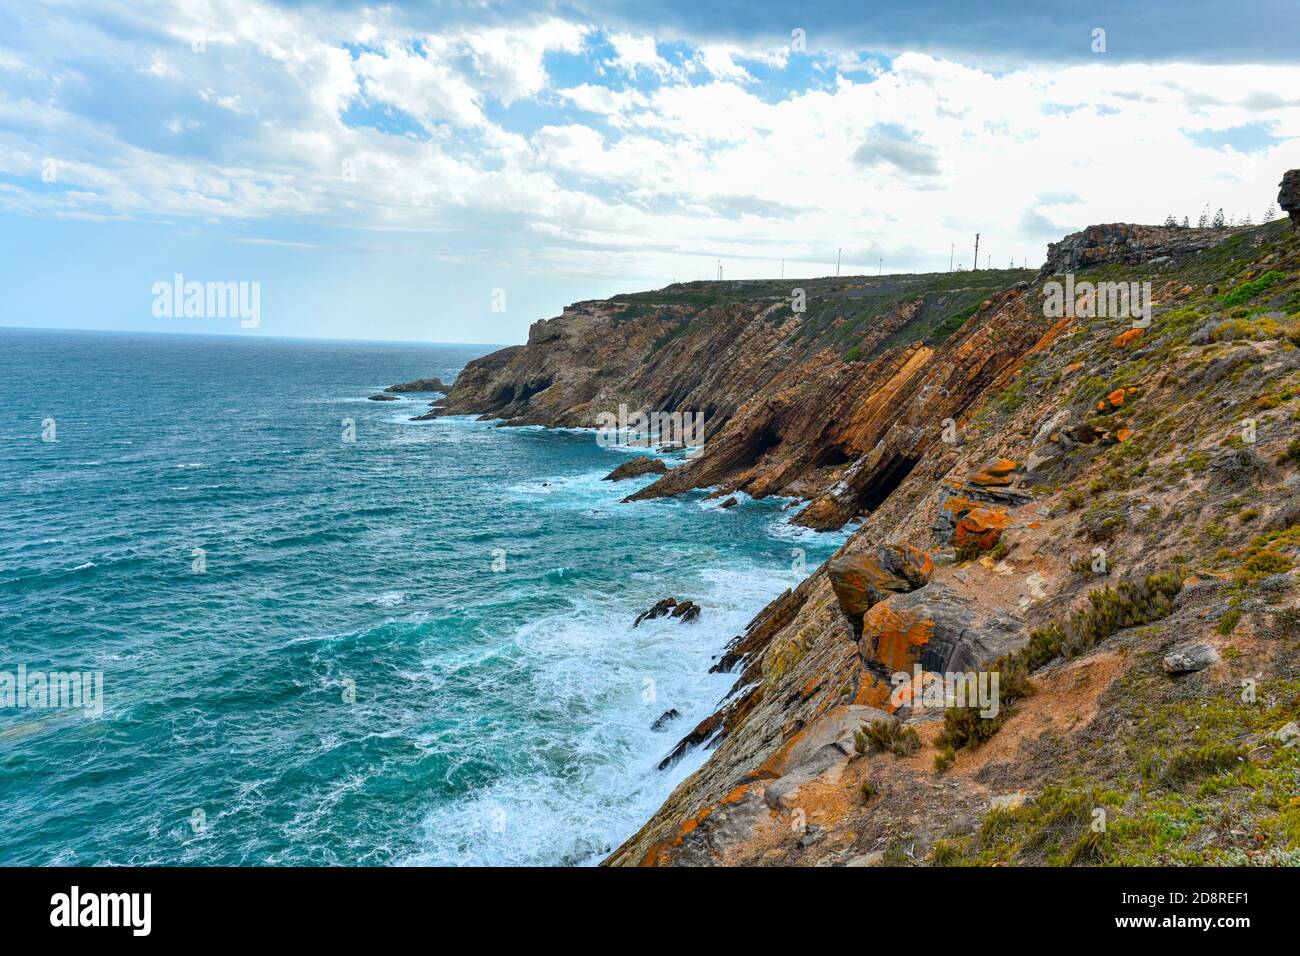 The magnificent view from the Cape St Blaize Lighthouse, Mossel Bay, Garden Route, South Africa Stock Photo